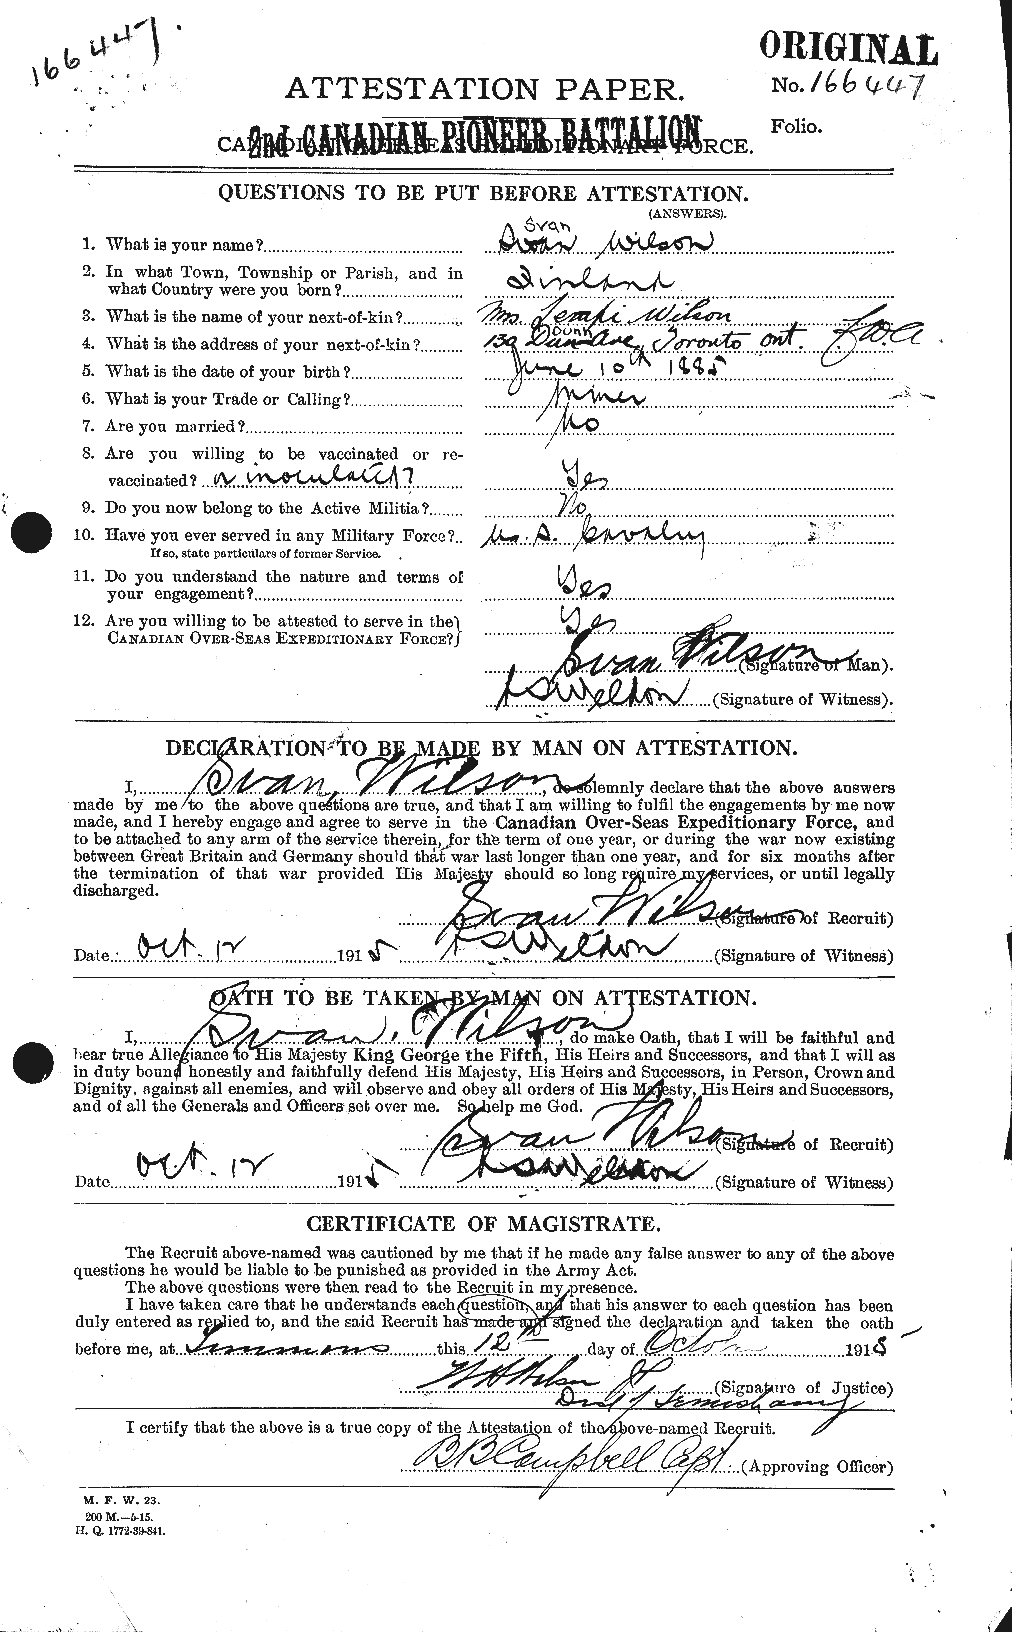 Personnel Records of the First World War - CEF 681156a